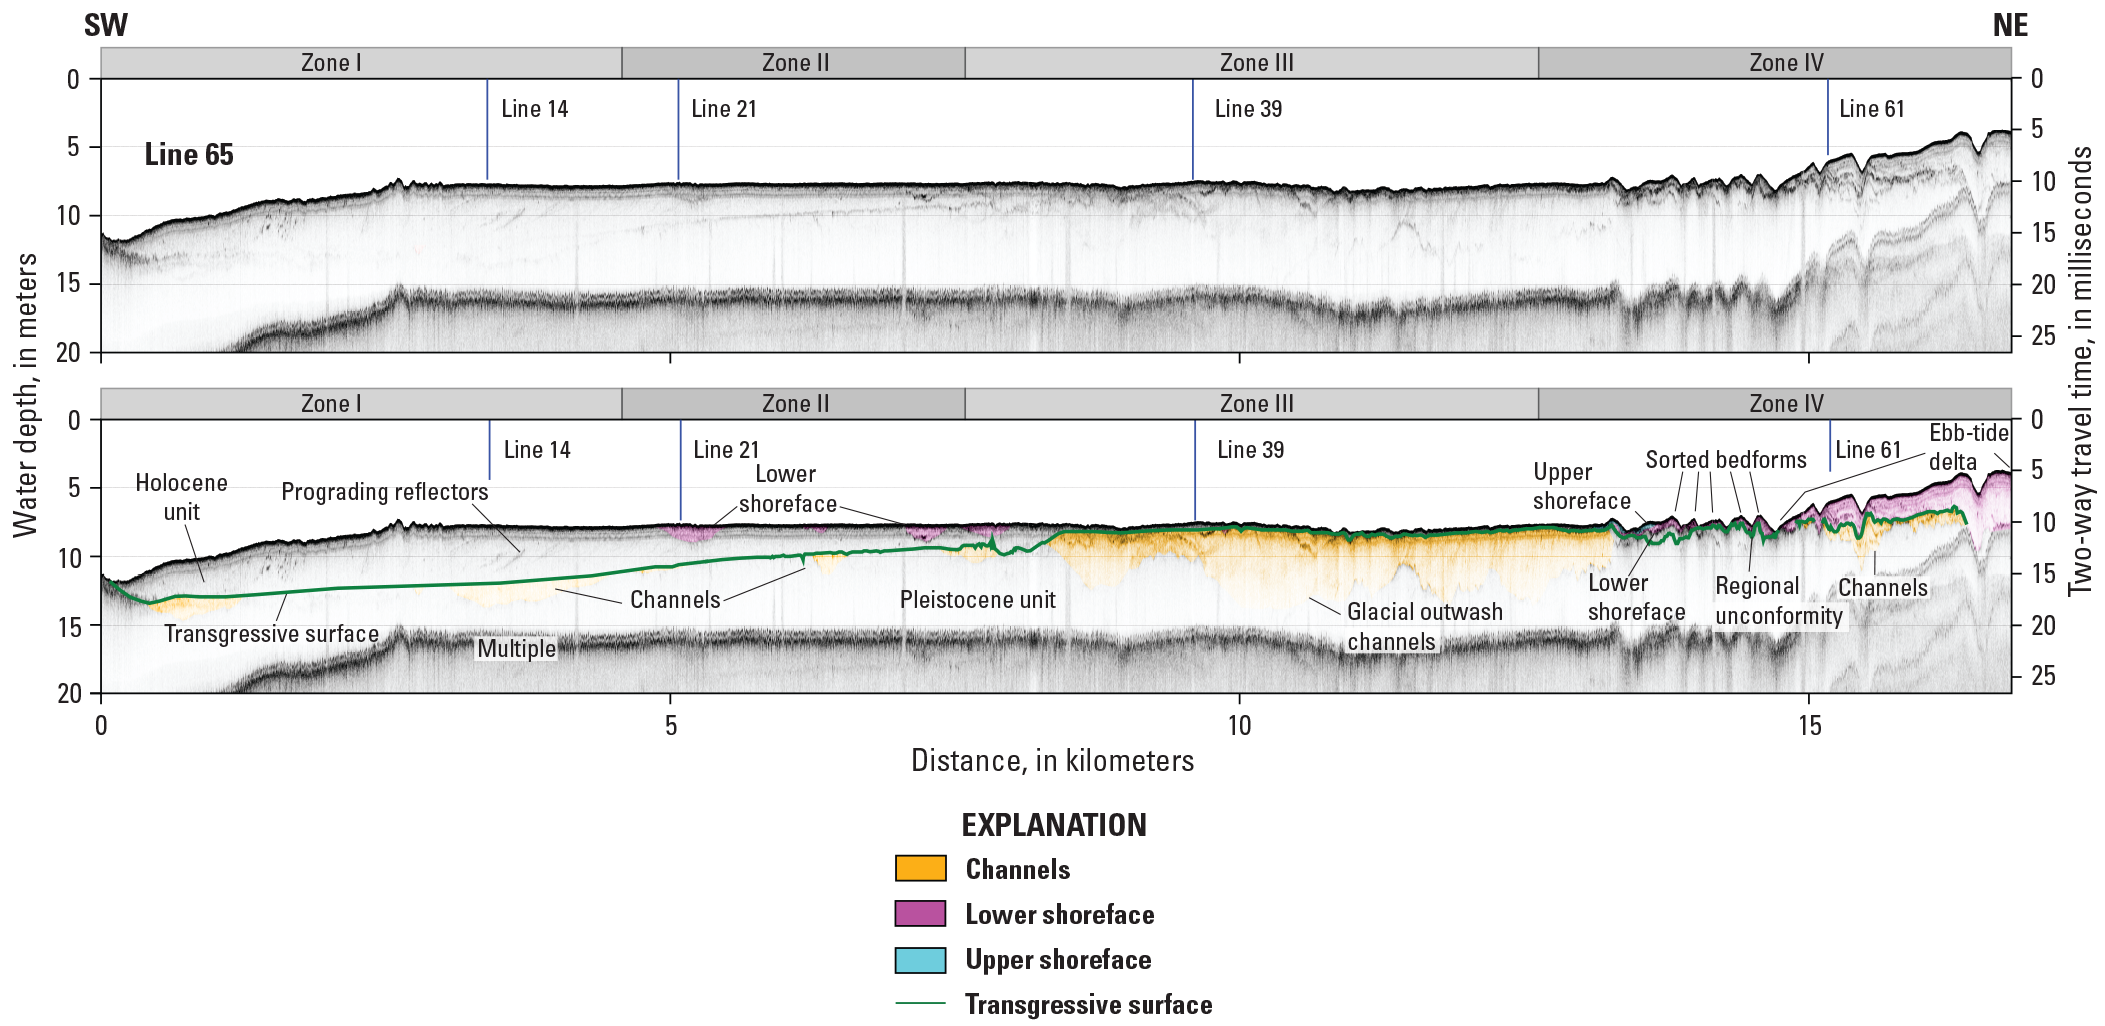 This strike profile shows how the geometry of the Holocene sediment unit and the transgressive
                     surface vary along the margin.